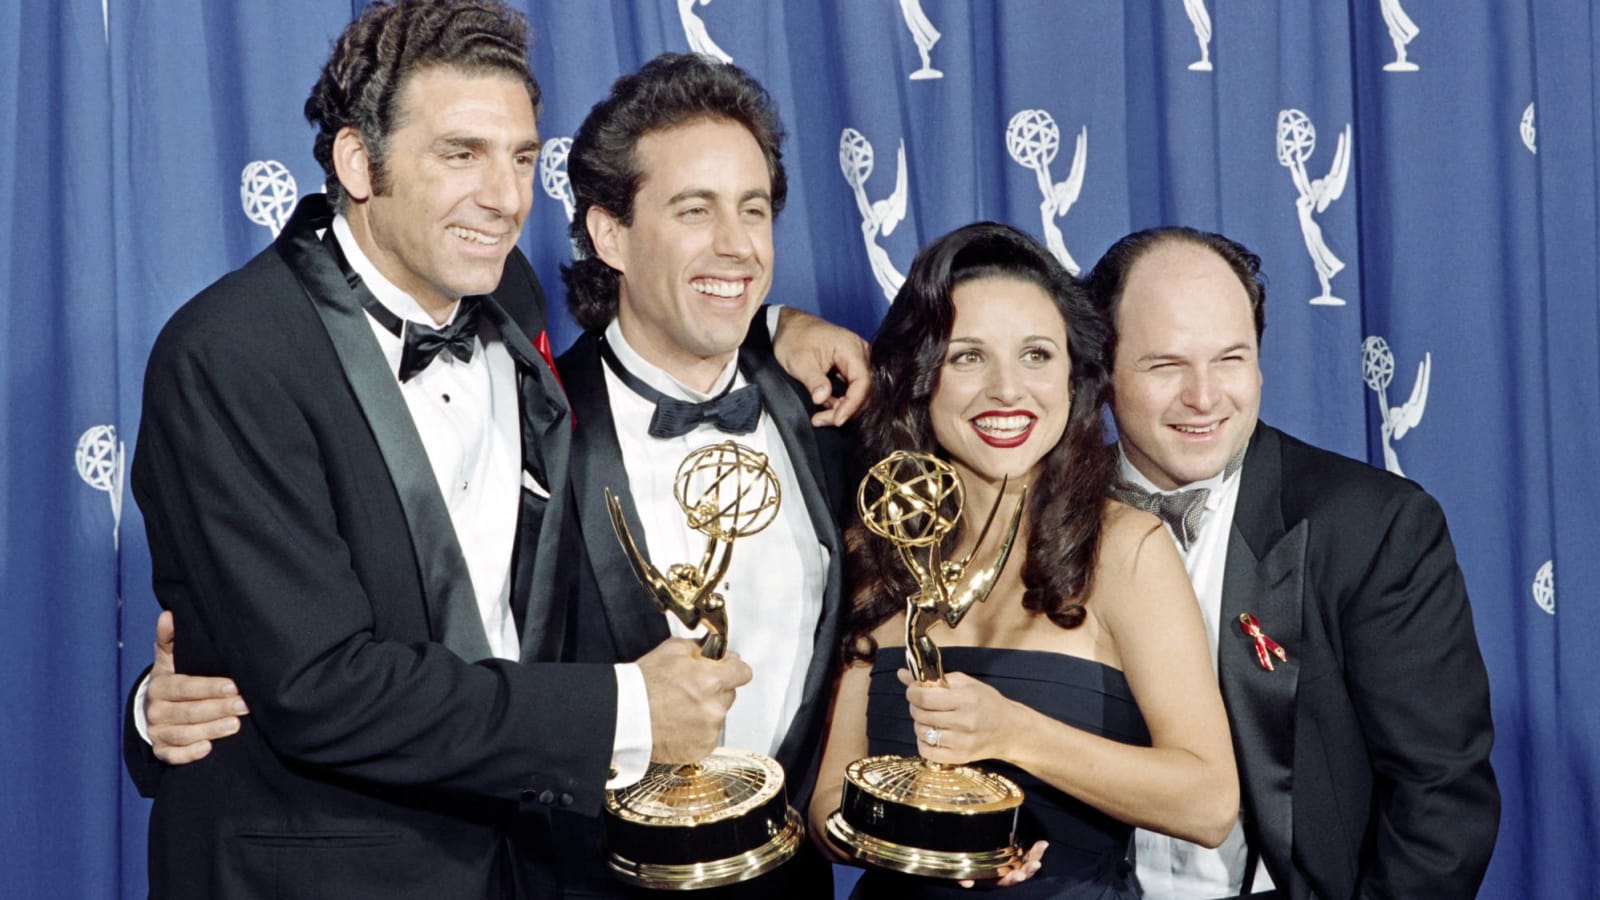 The cast of 'Seinfeld': Where are they now?